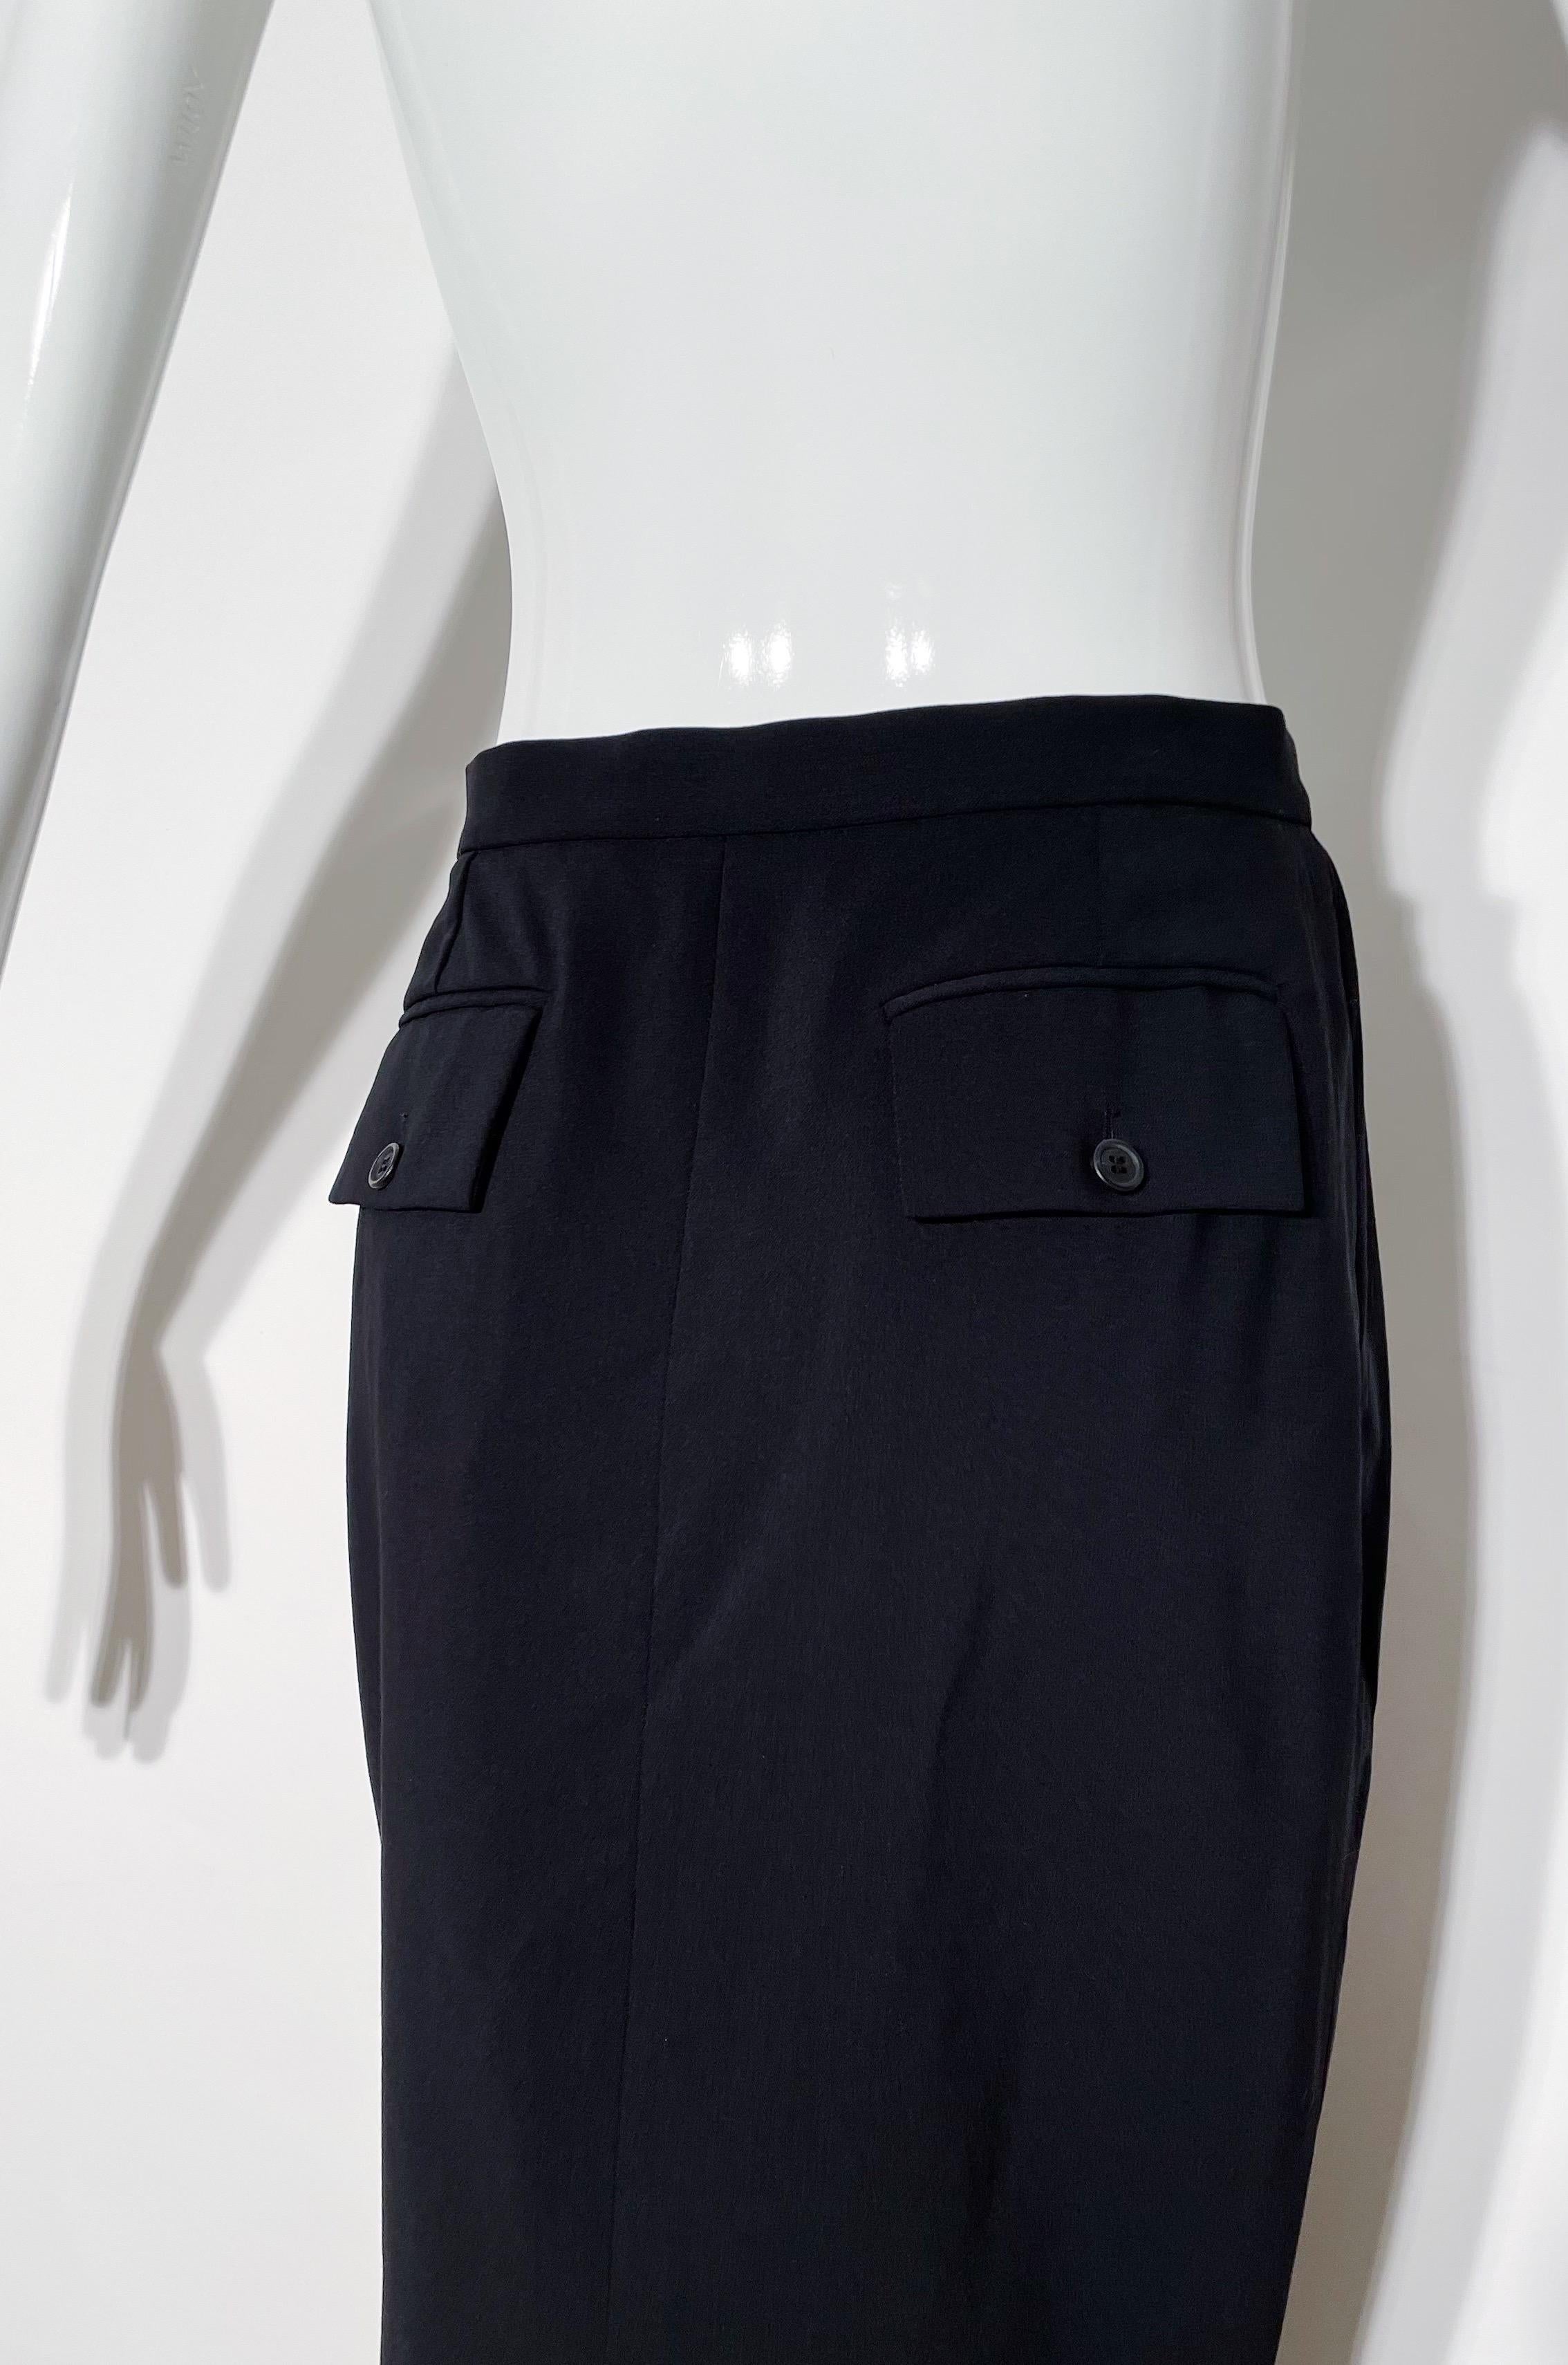 Dolce & Gabbana Pencil Skirt In Excellent Condition For Sale In Los Angeles, CA